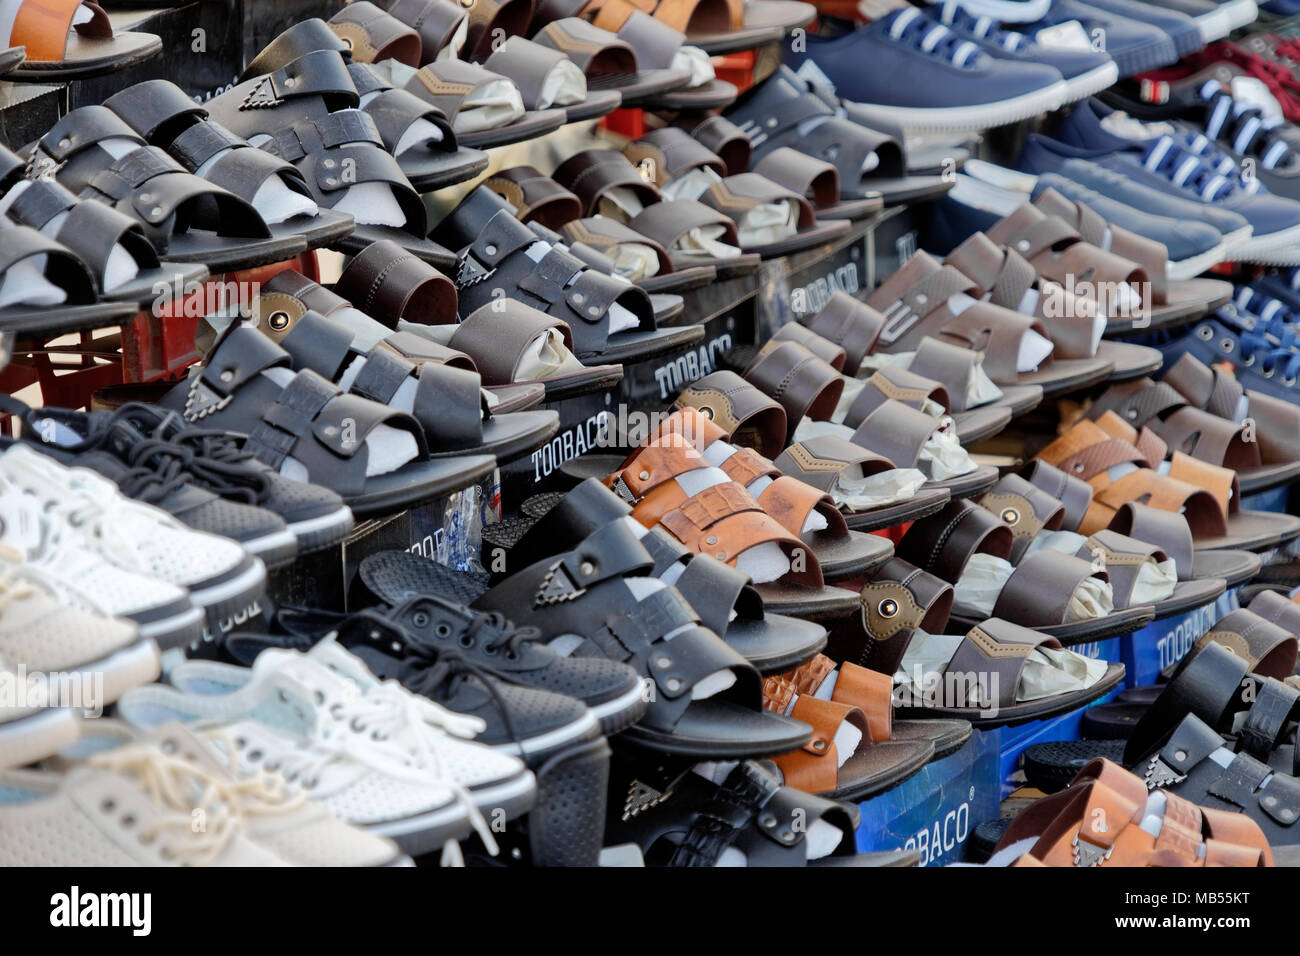 Aqaba, Jordan, March 8,2018: Market stall in the city center with many  shoes and sandals for sale to locals and tourists, middle east Stock Photo  - Alamy